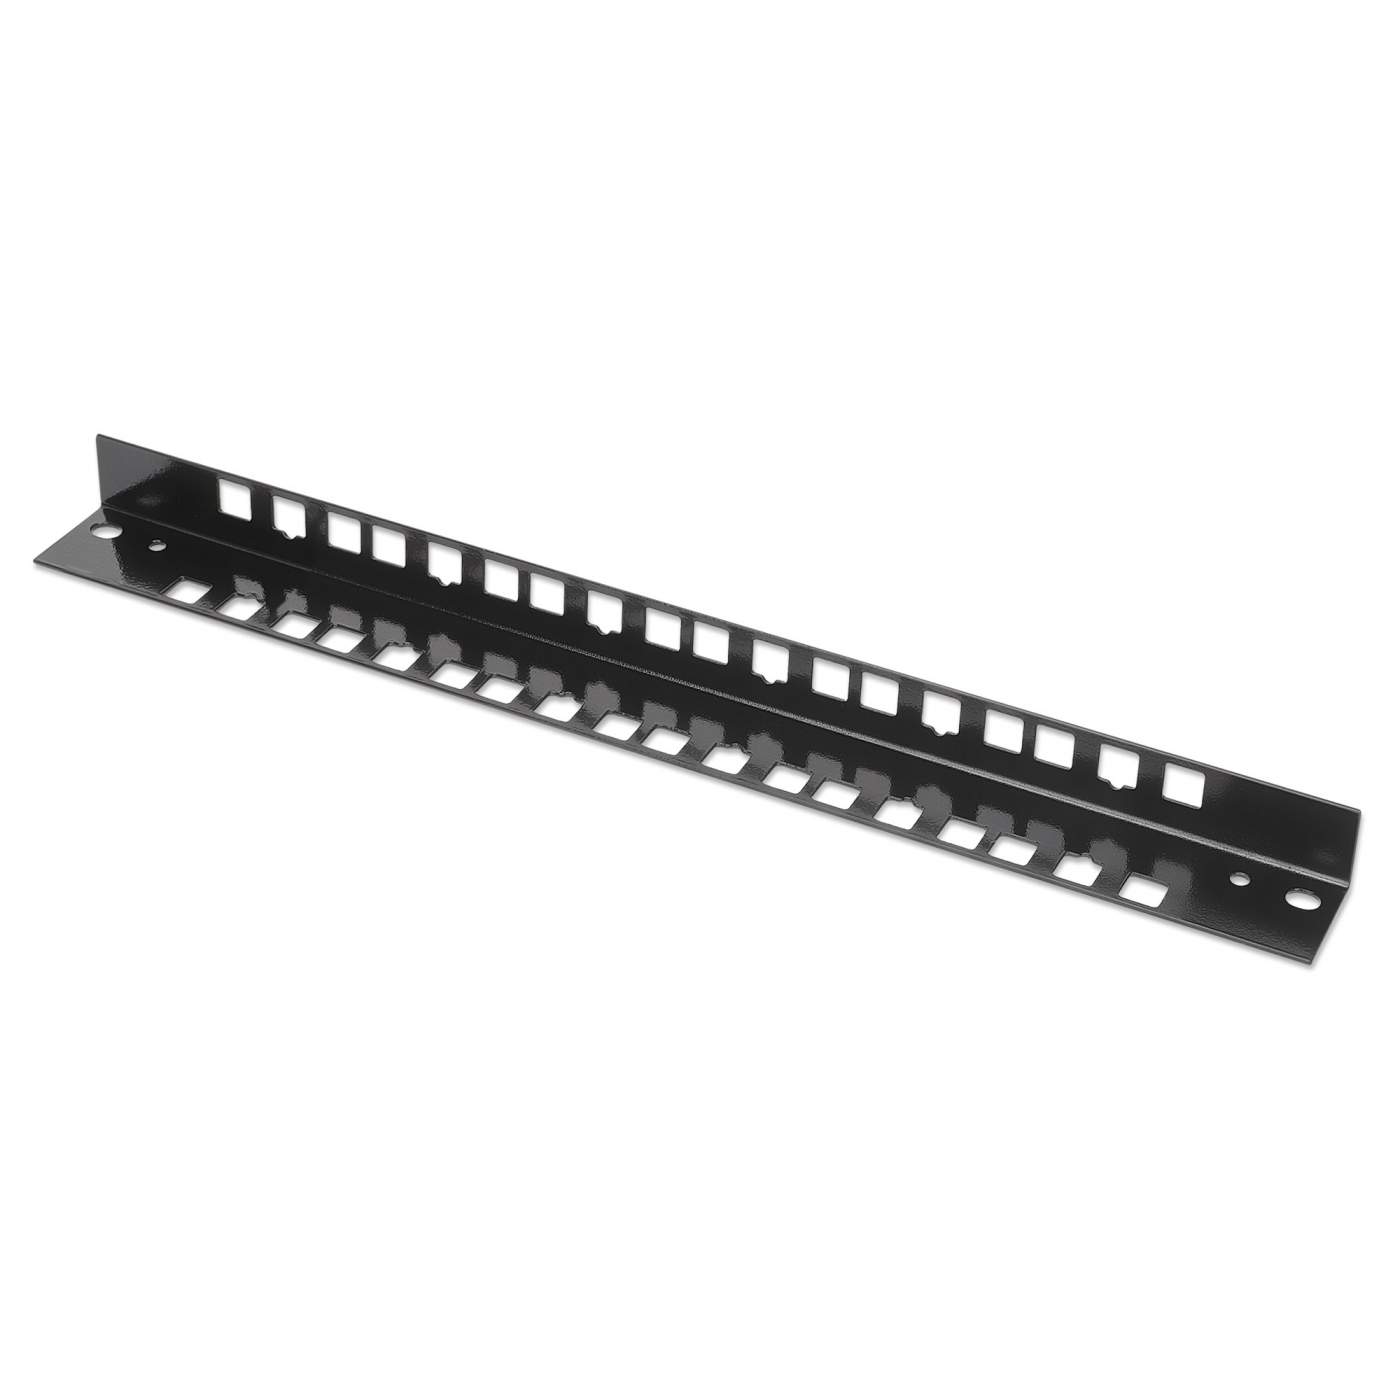 Spare Rails for 19" Wallmount Cabinets, 6U Image 1